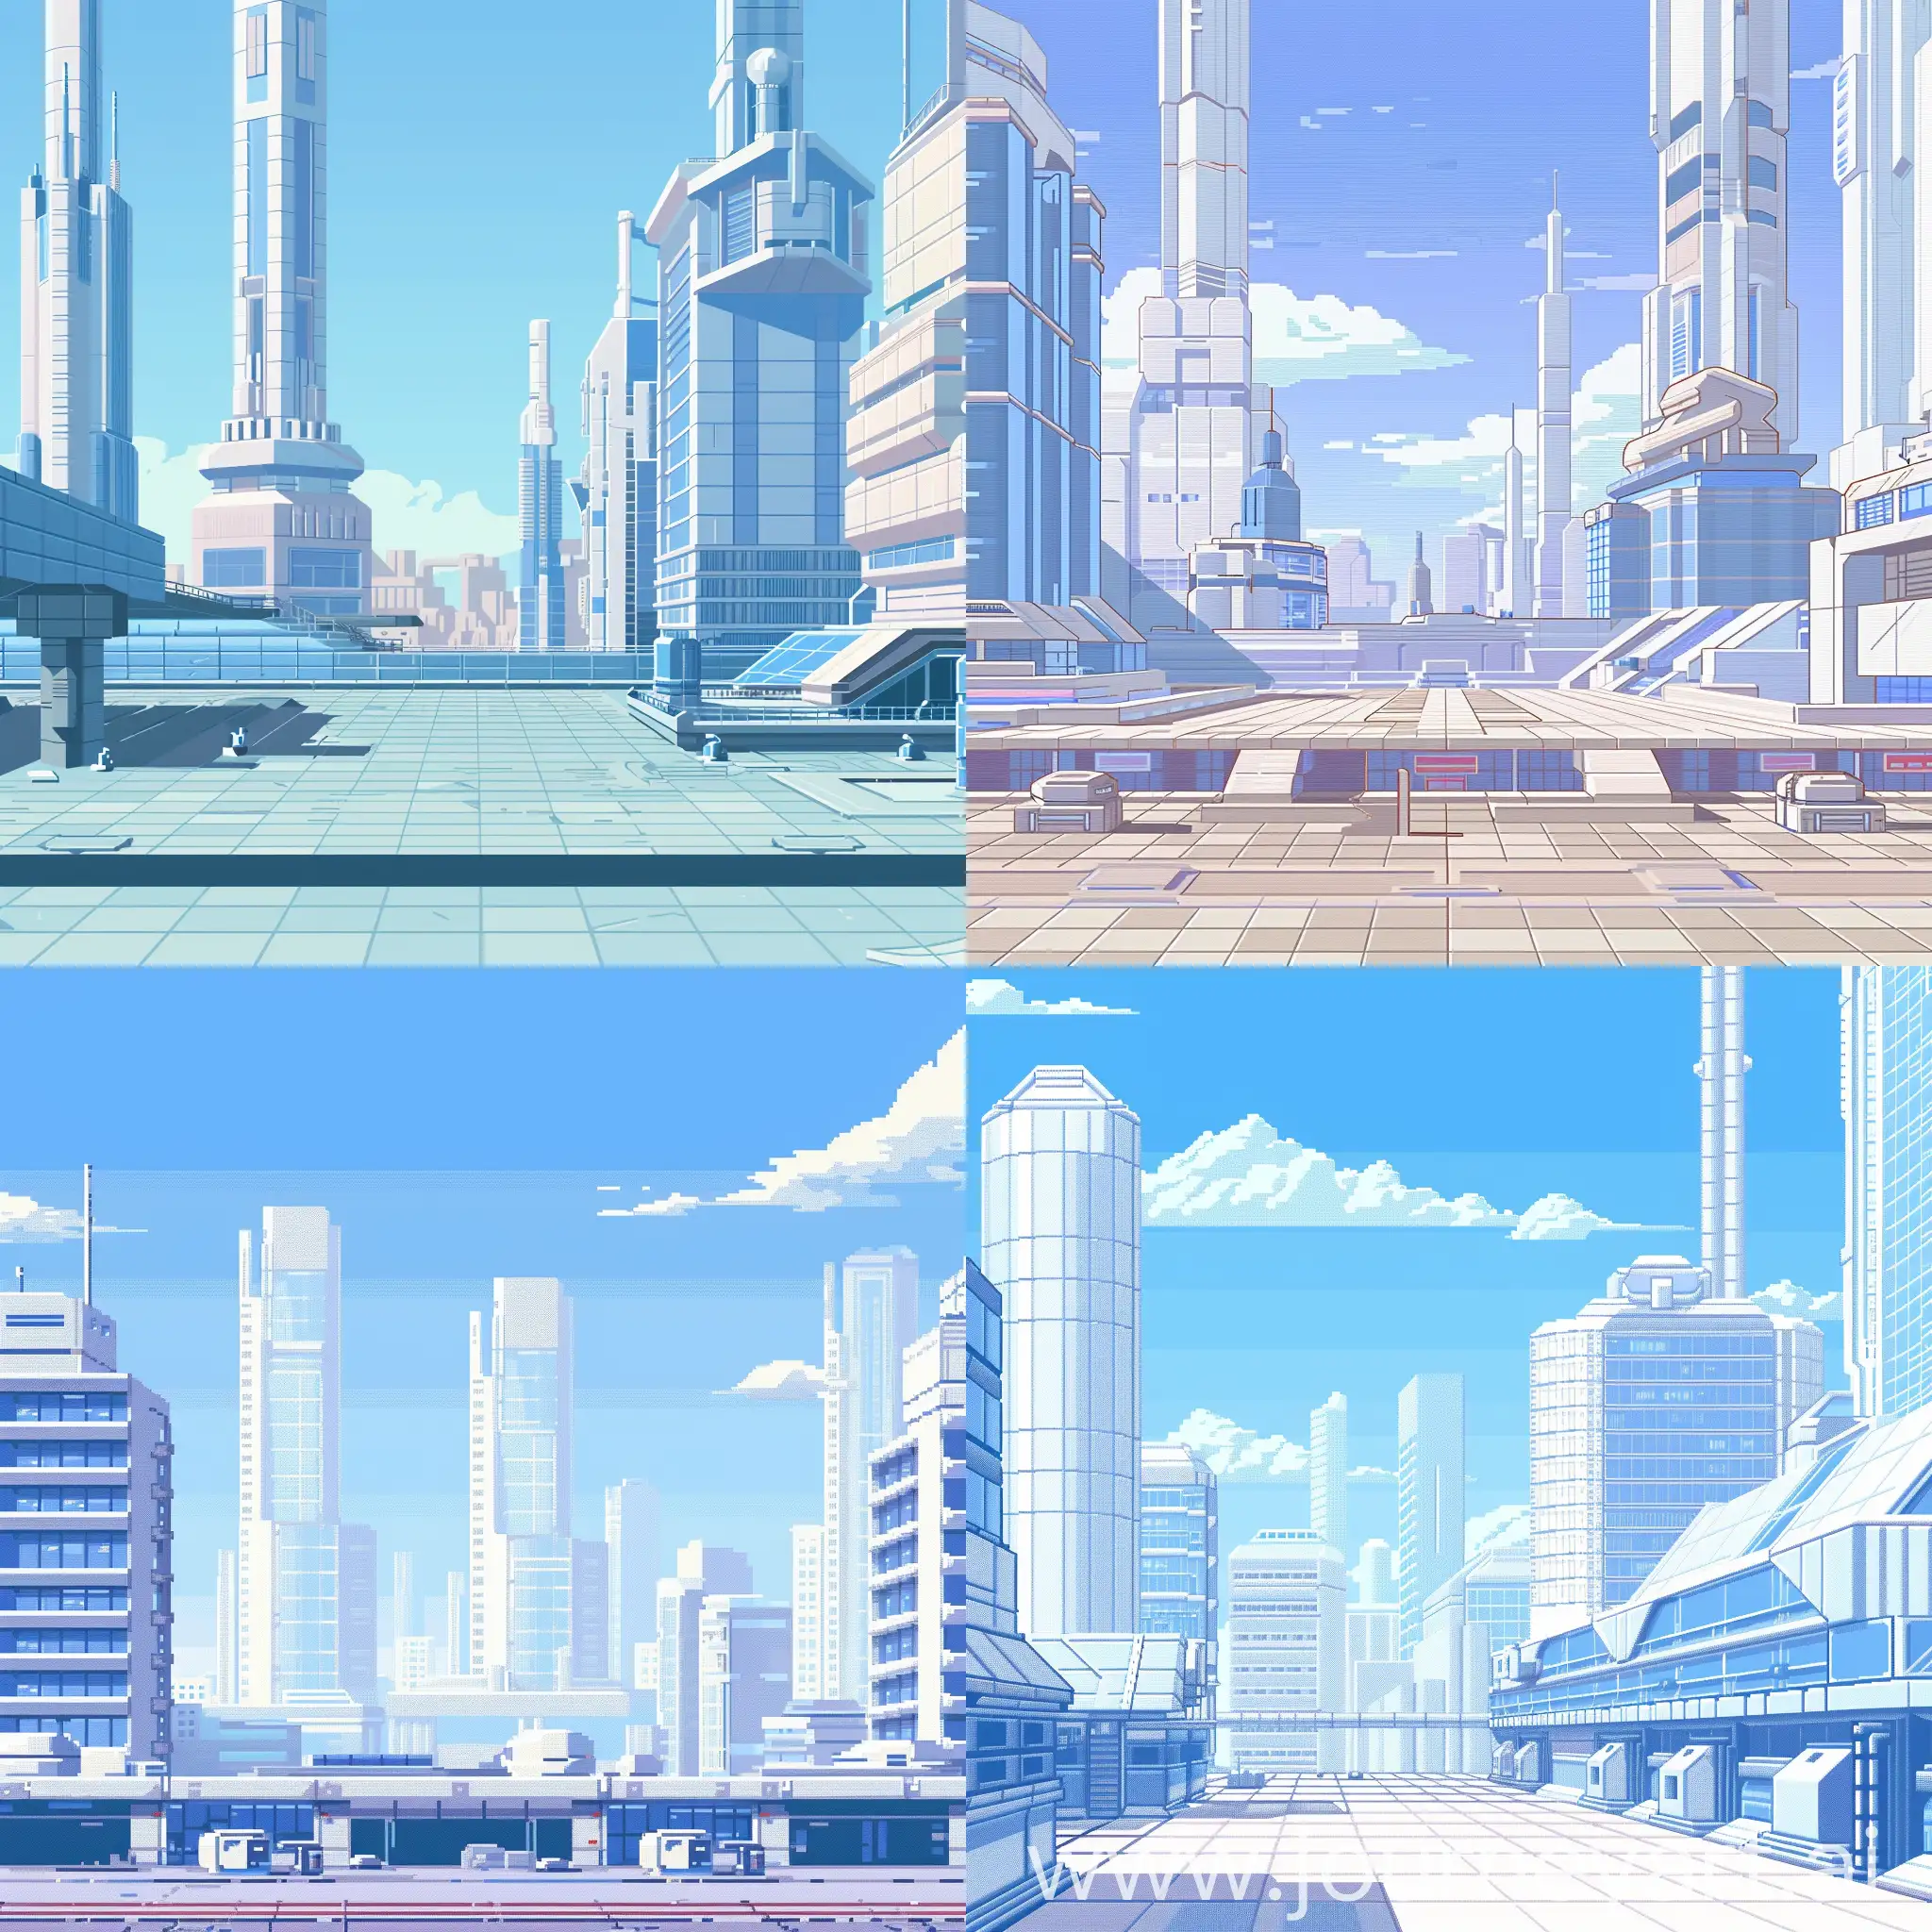 2D pixel art background for a USSR-themed game. Retrofuturism/futurism style. Day. background: Blue sky, several tall buildings in the distance with white concrete and glass cladding. Rounded or sharp angles. Foreground: glassy building and other futuristic elements.